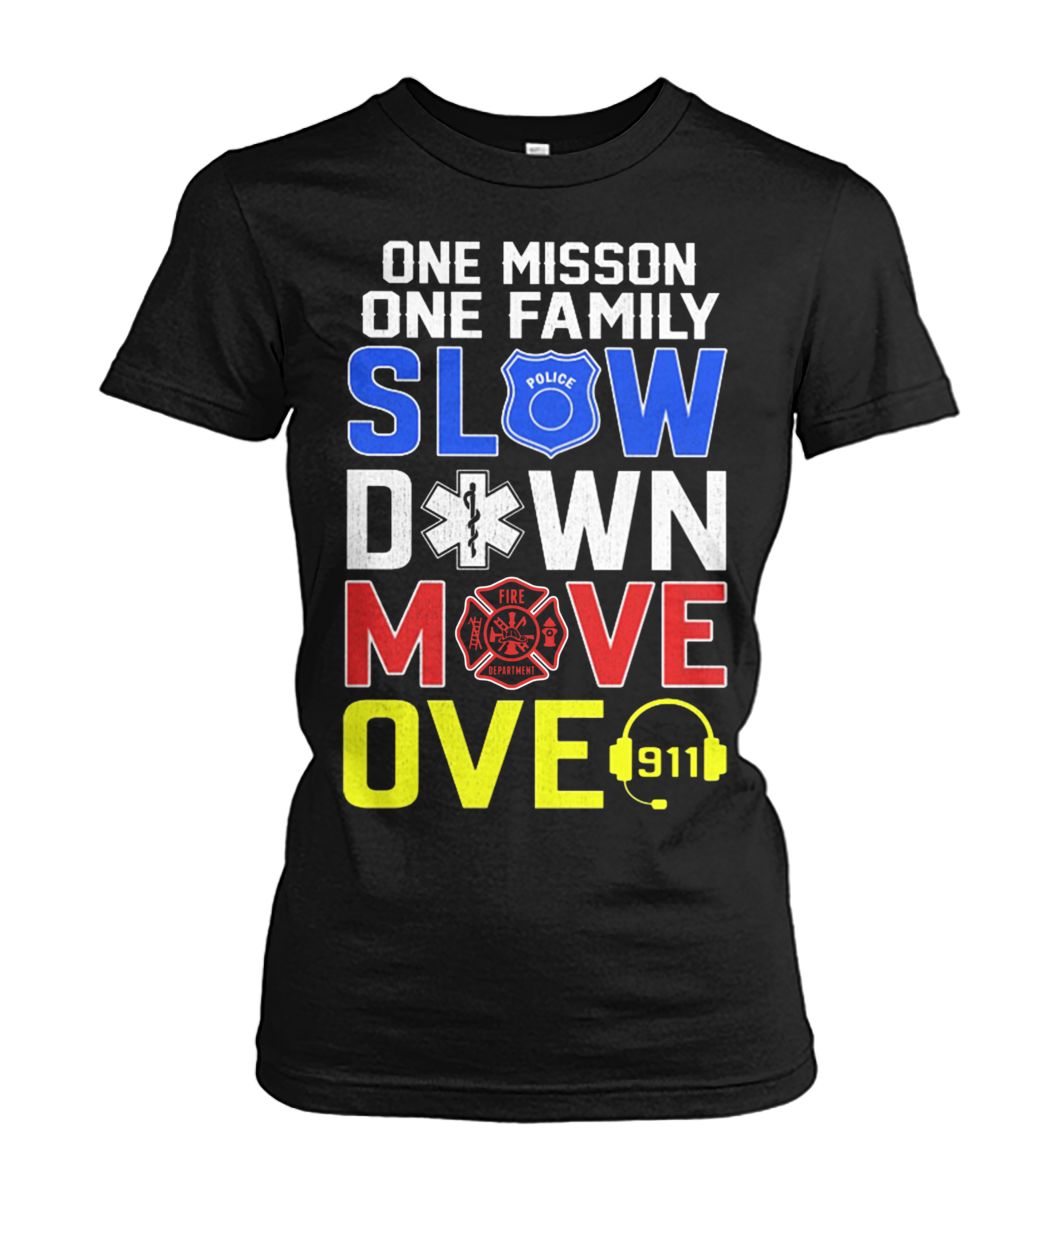 One misson one family slow down move over 911 women's crew tee